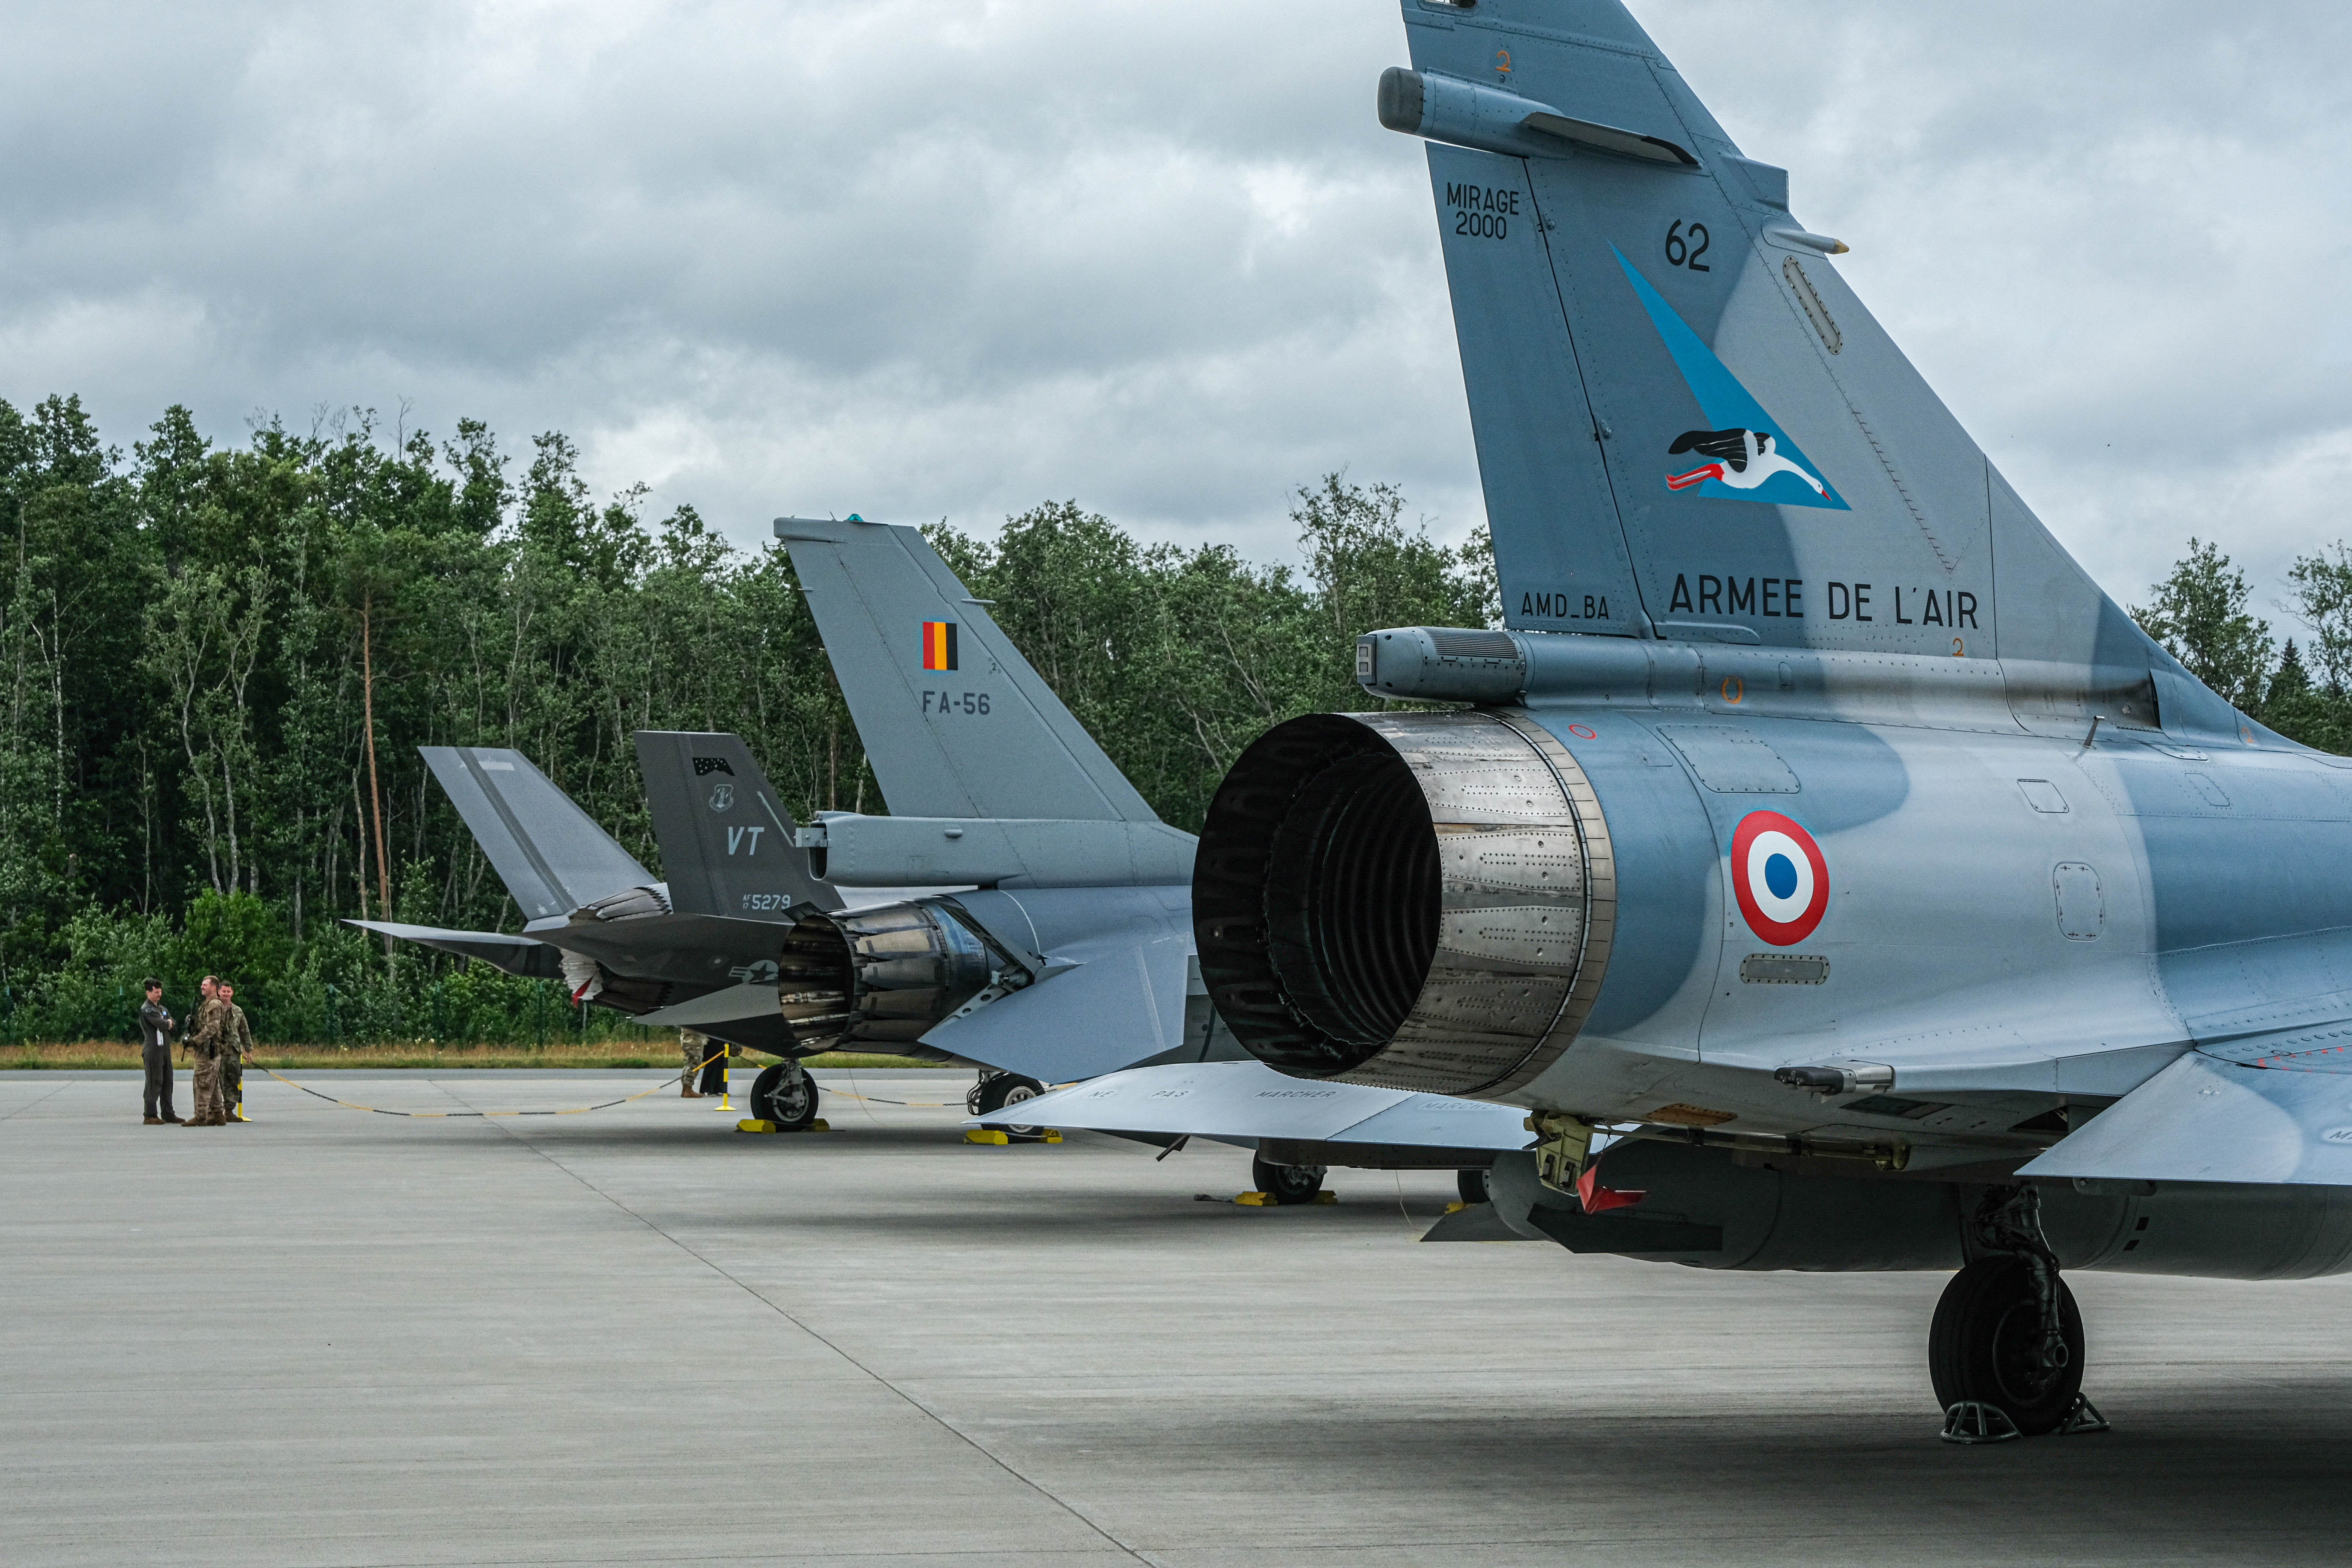 Image shows French and Belgium aircraft on the airfield.